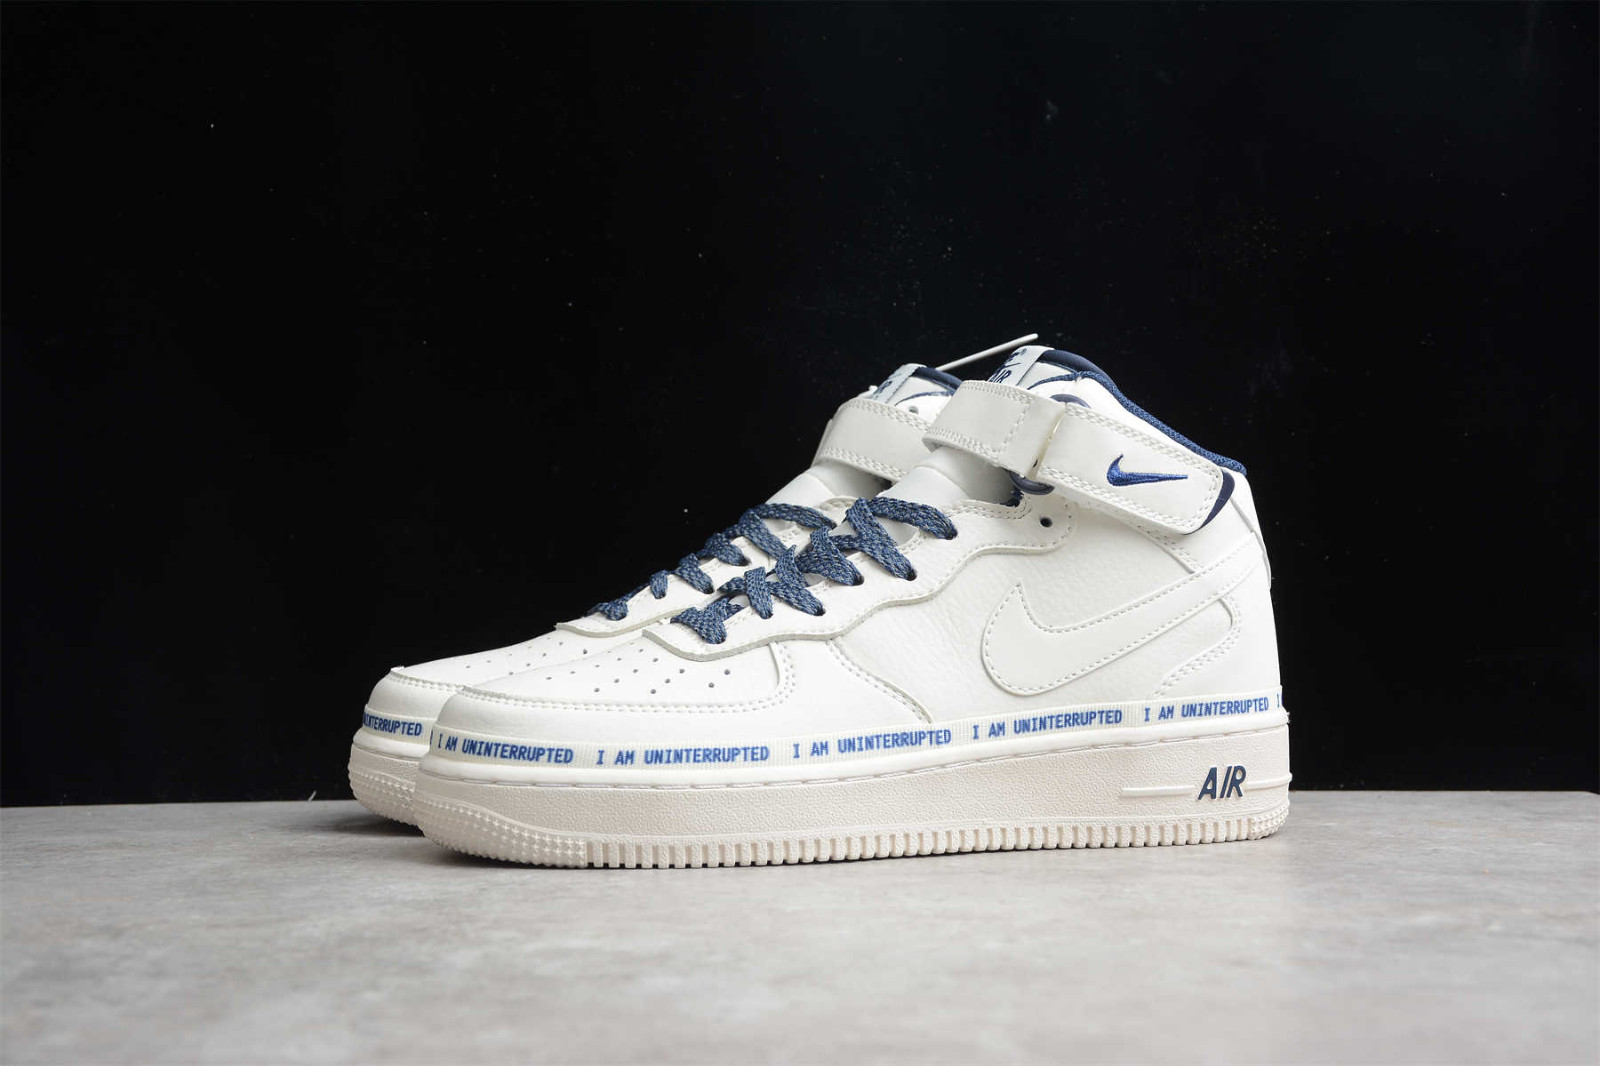 Uninterrupted Nike pack Air Force 1 07 Mid White Blue NU8802 - 303 - nike pack air max outlet shopping center hours - StclaircomoShops